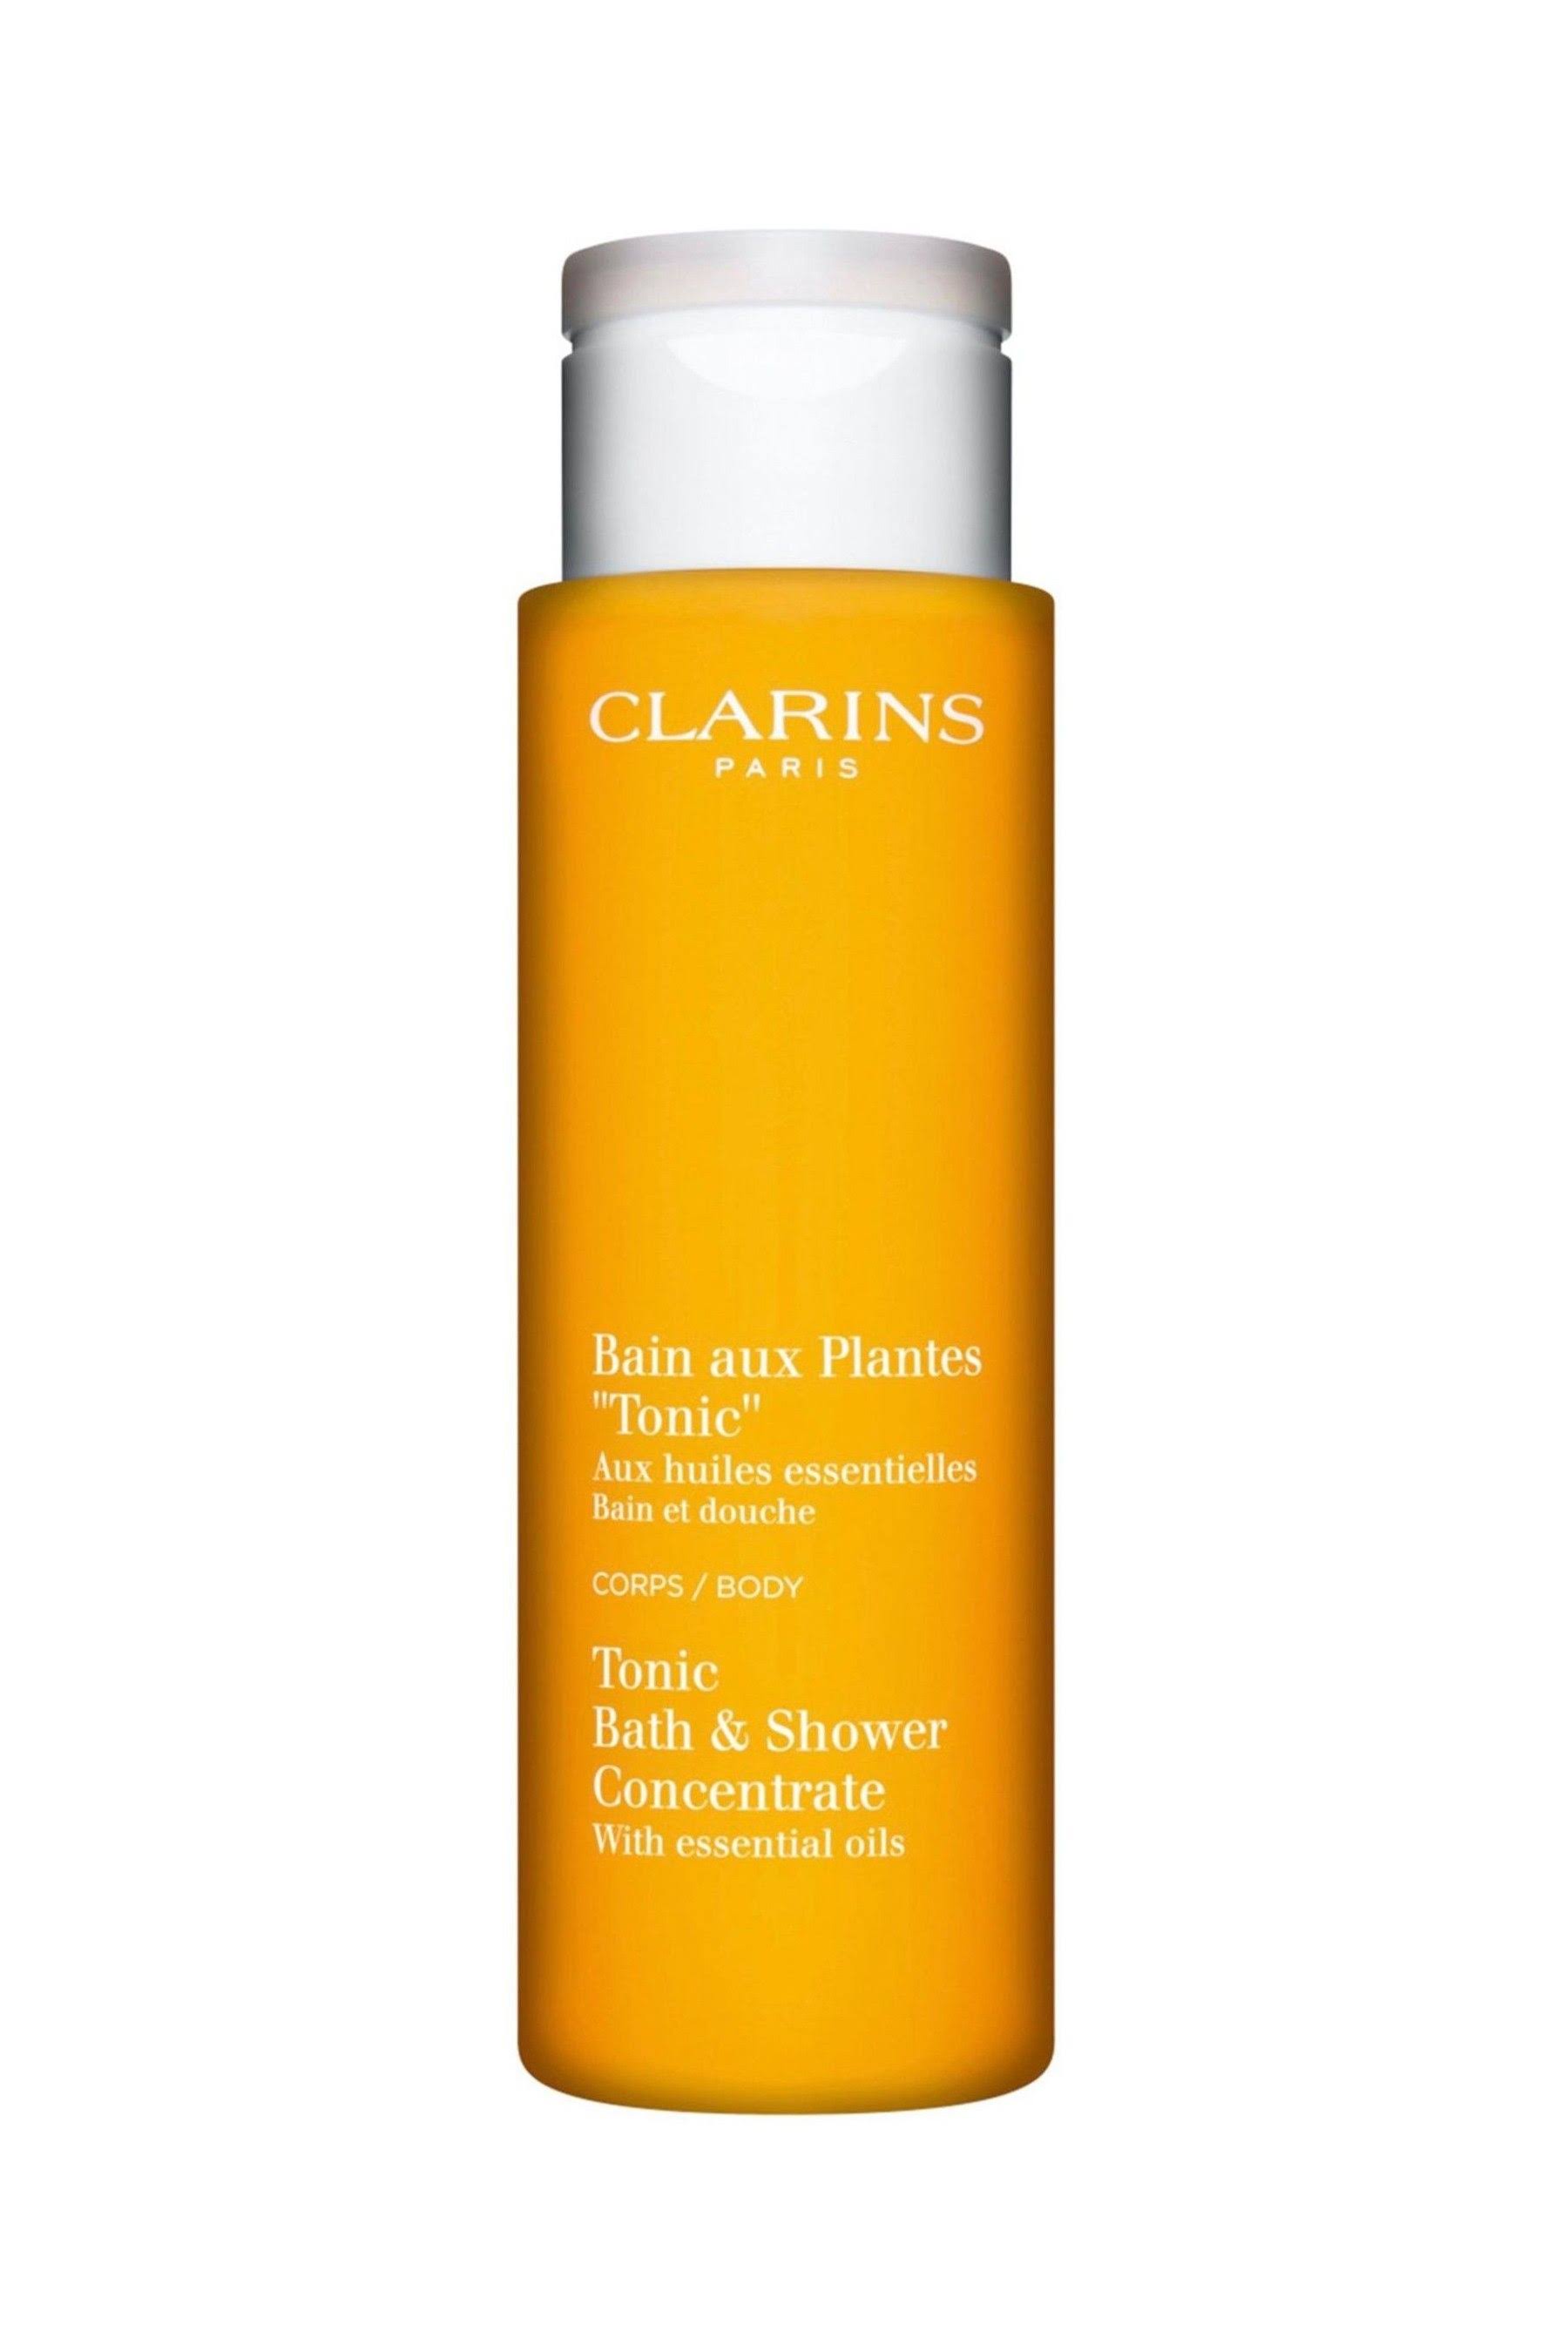 Clarins Tonic Bath and Shower Concentrate - 200ml